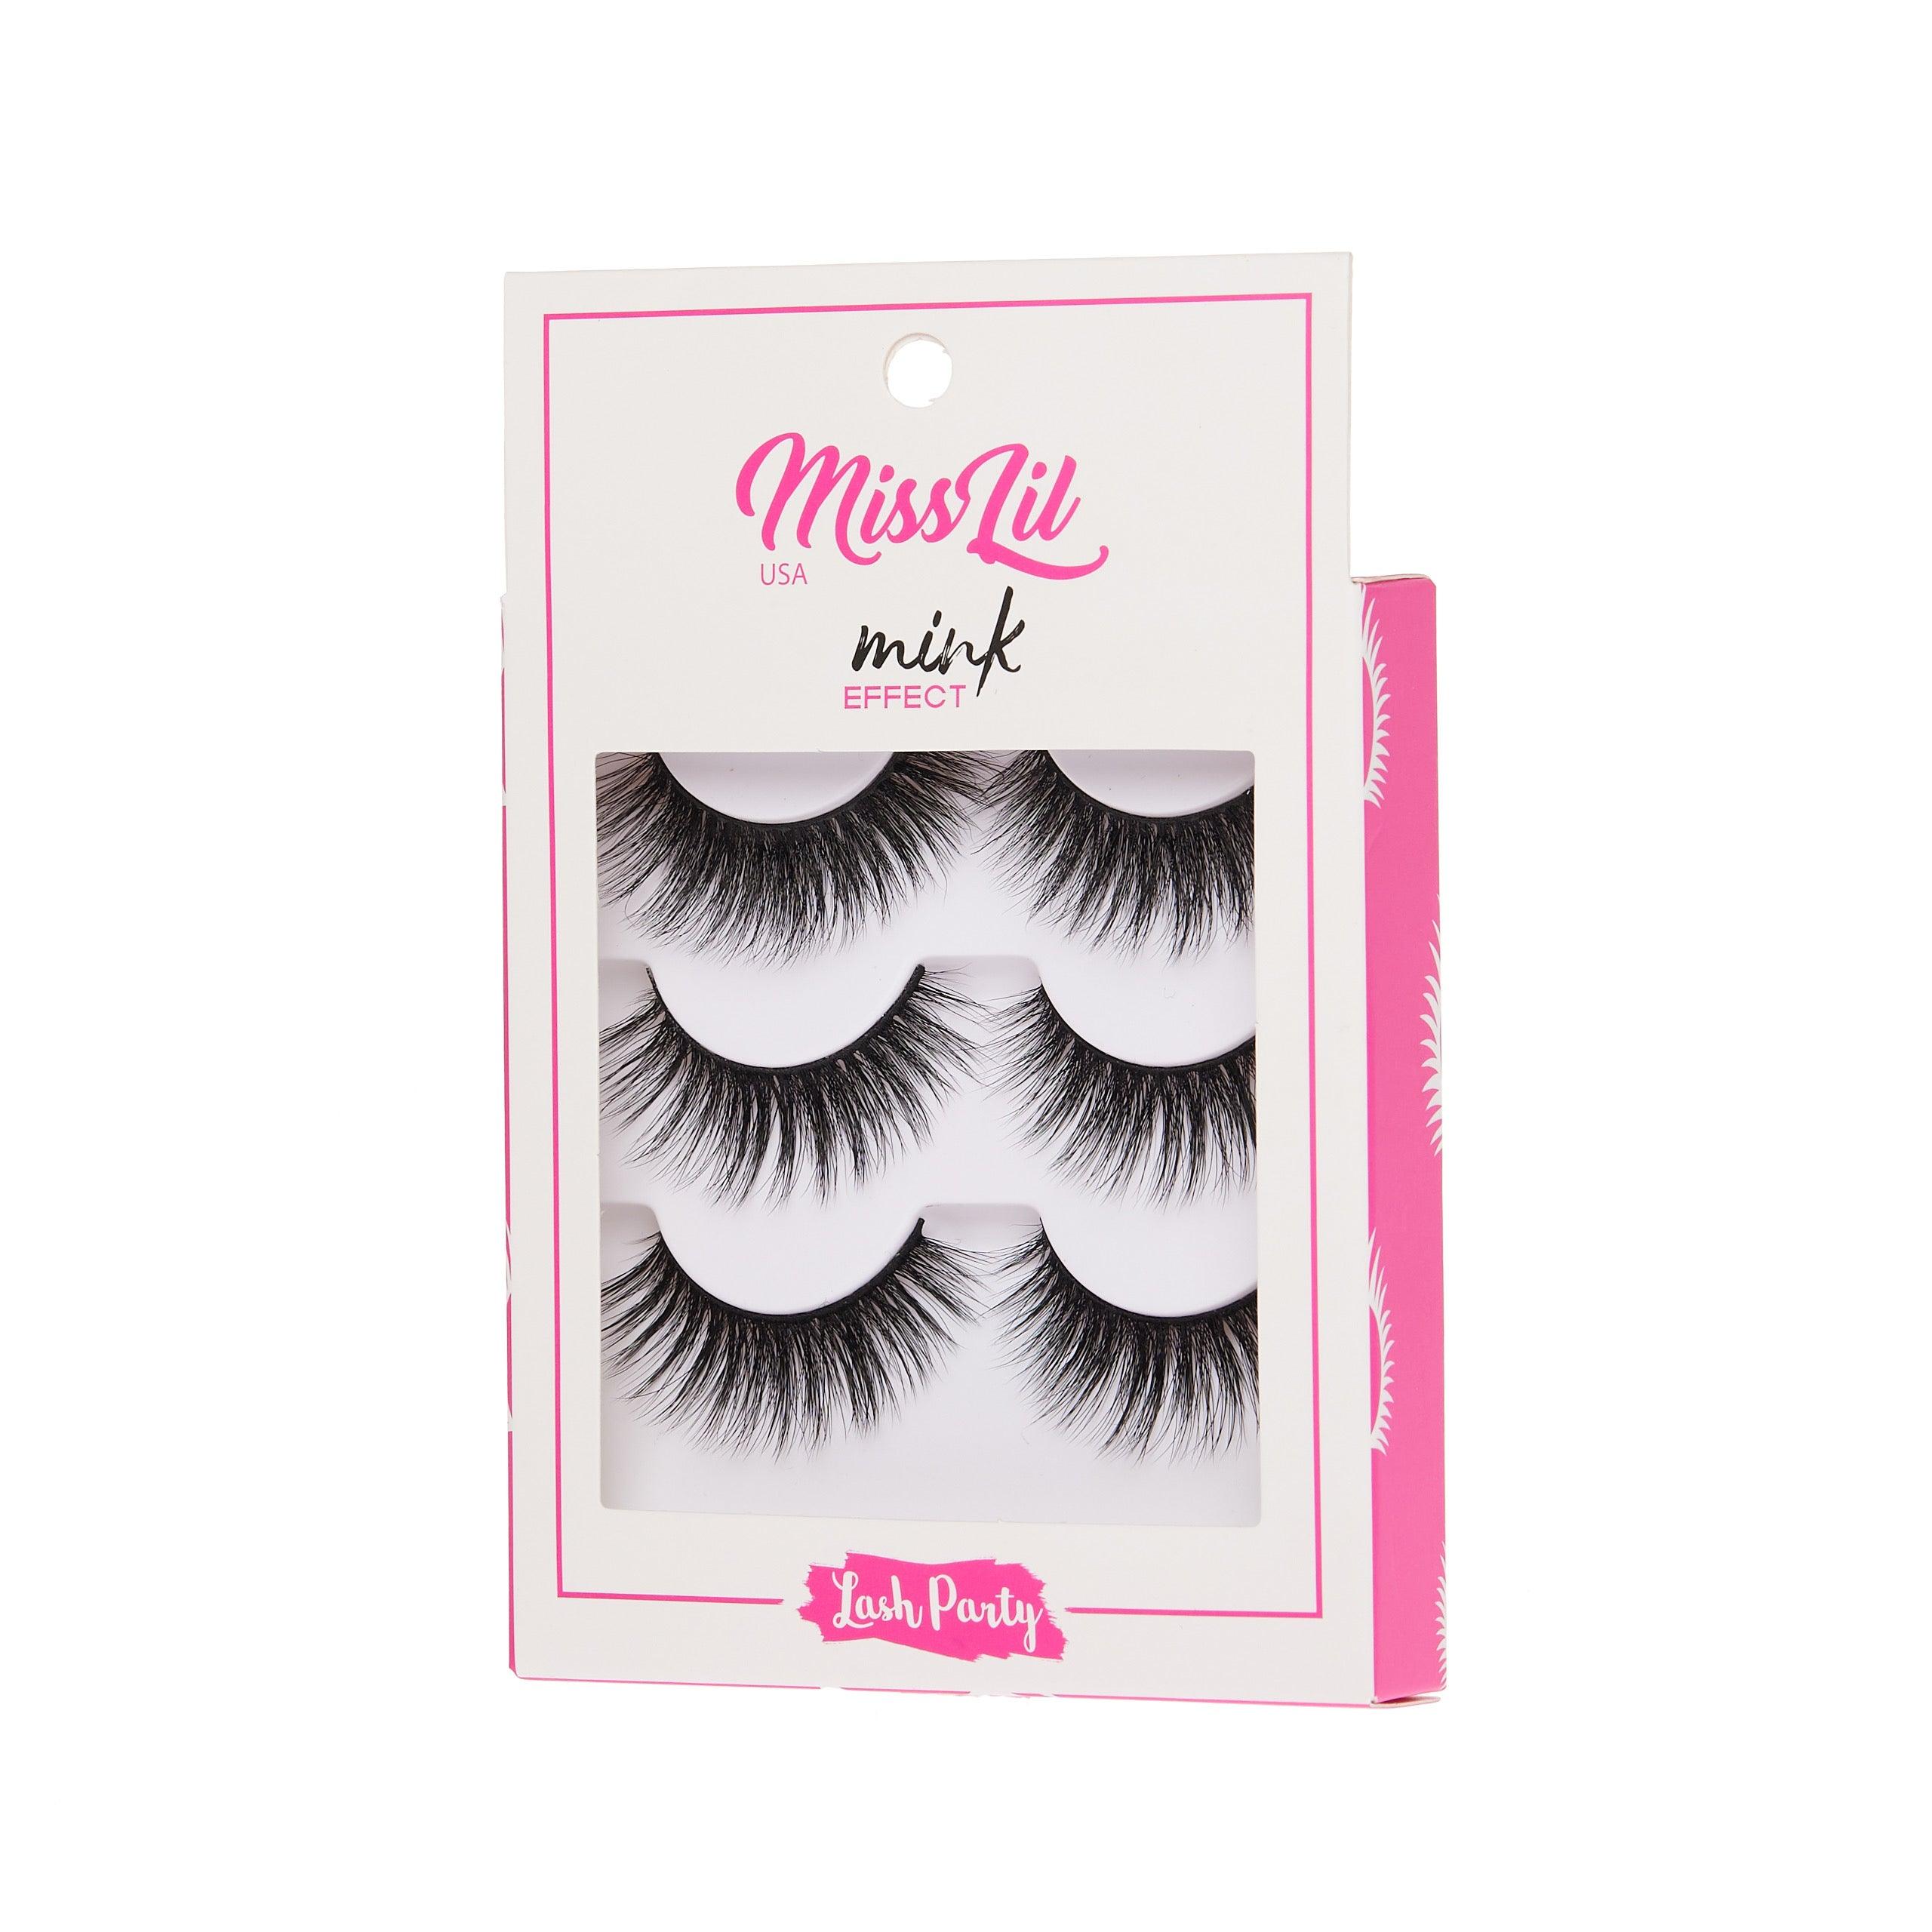 3-Pair Faux Mink Effect Eyelashes - Lash Party Collection #3 - Pack of 3 - Miss Lil USA